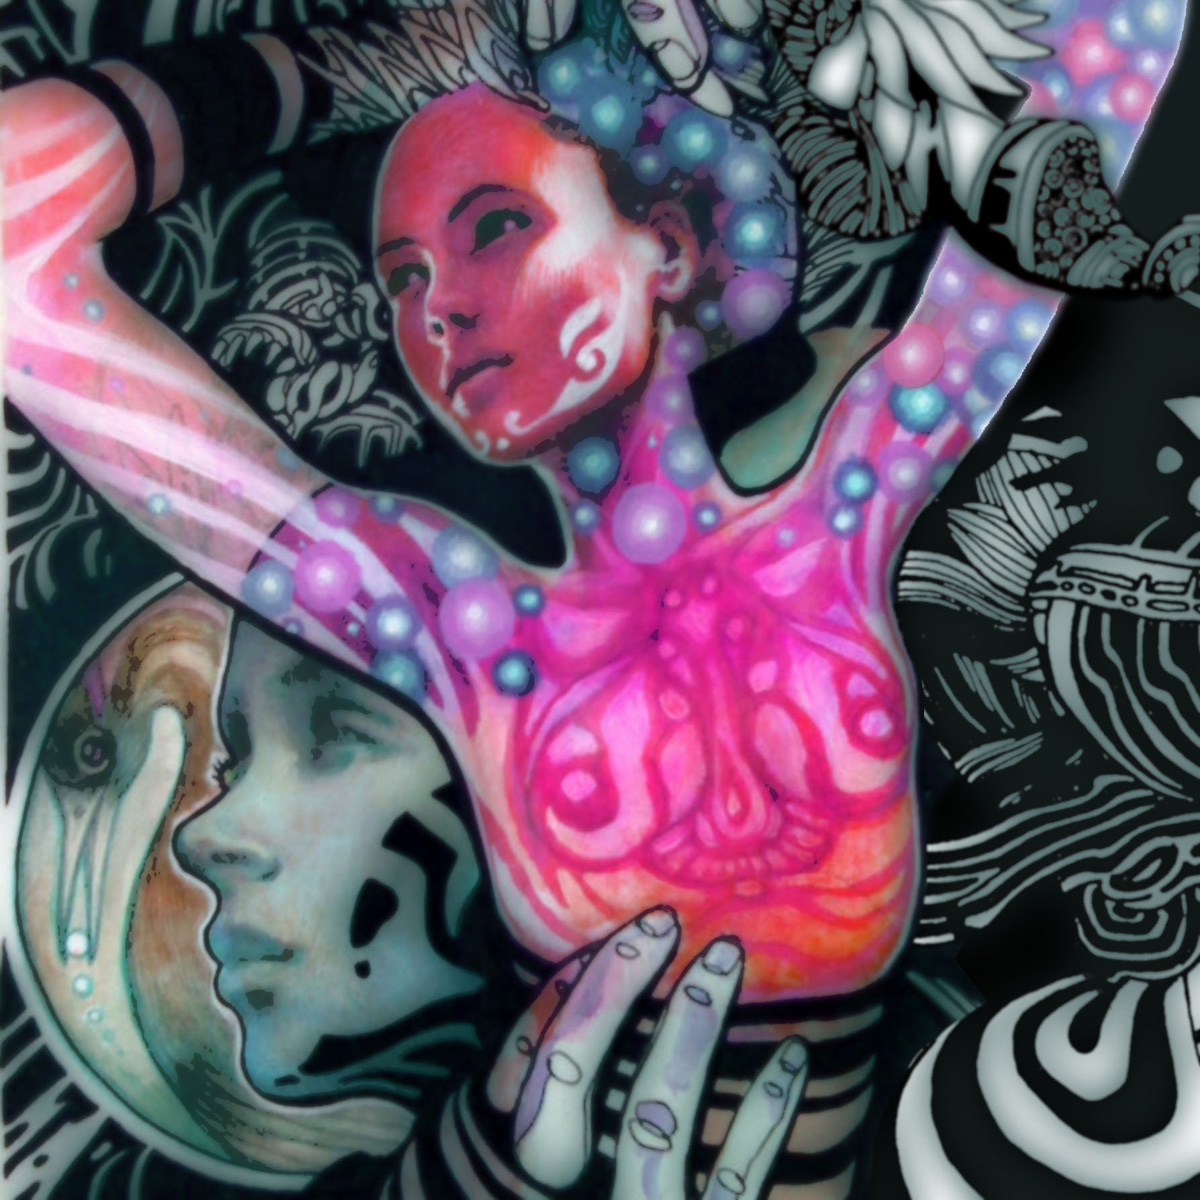 Trippy art images from web psychedelic blog sf